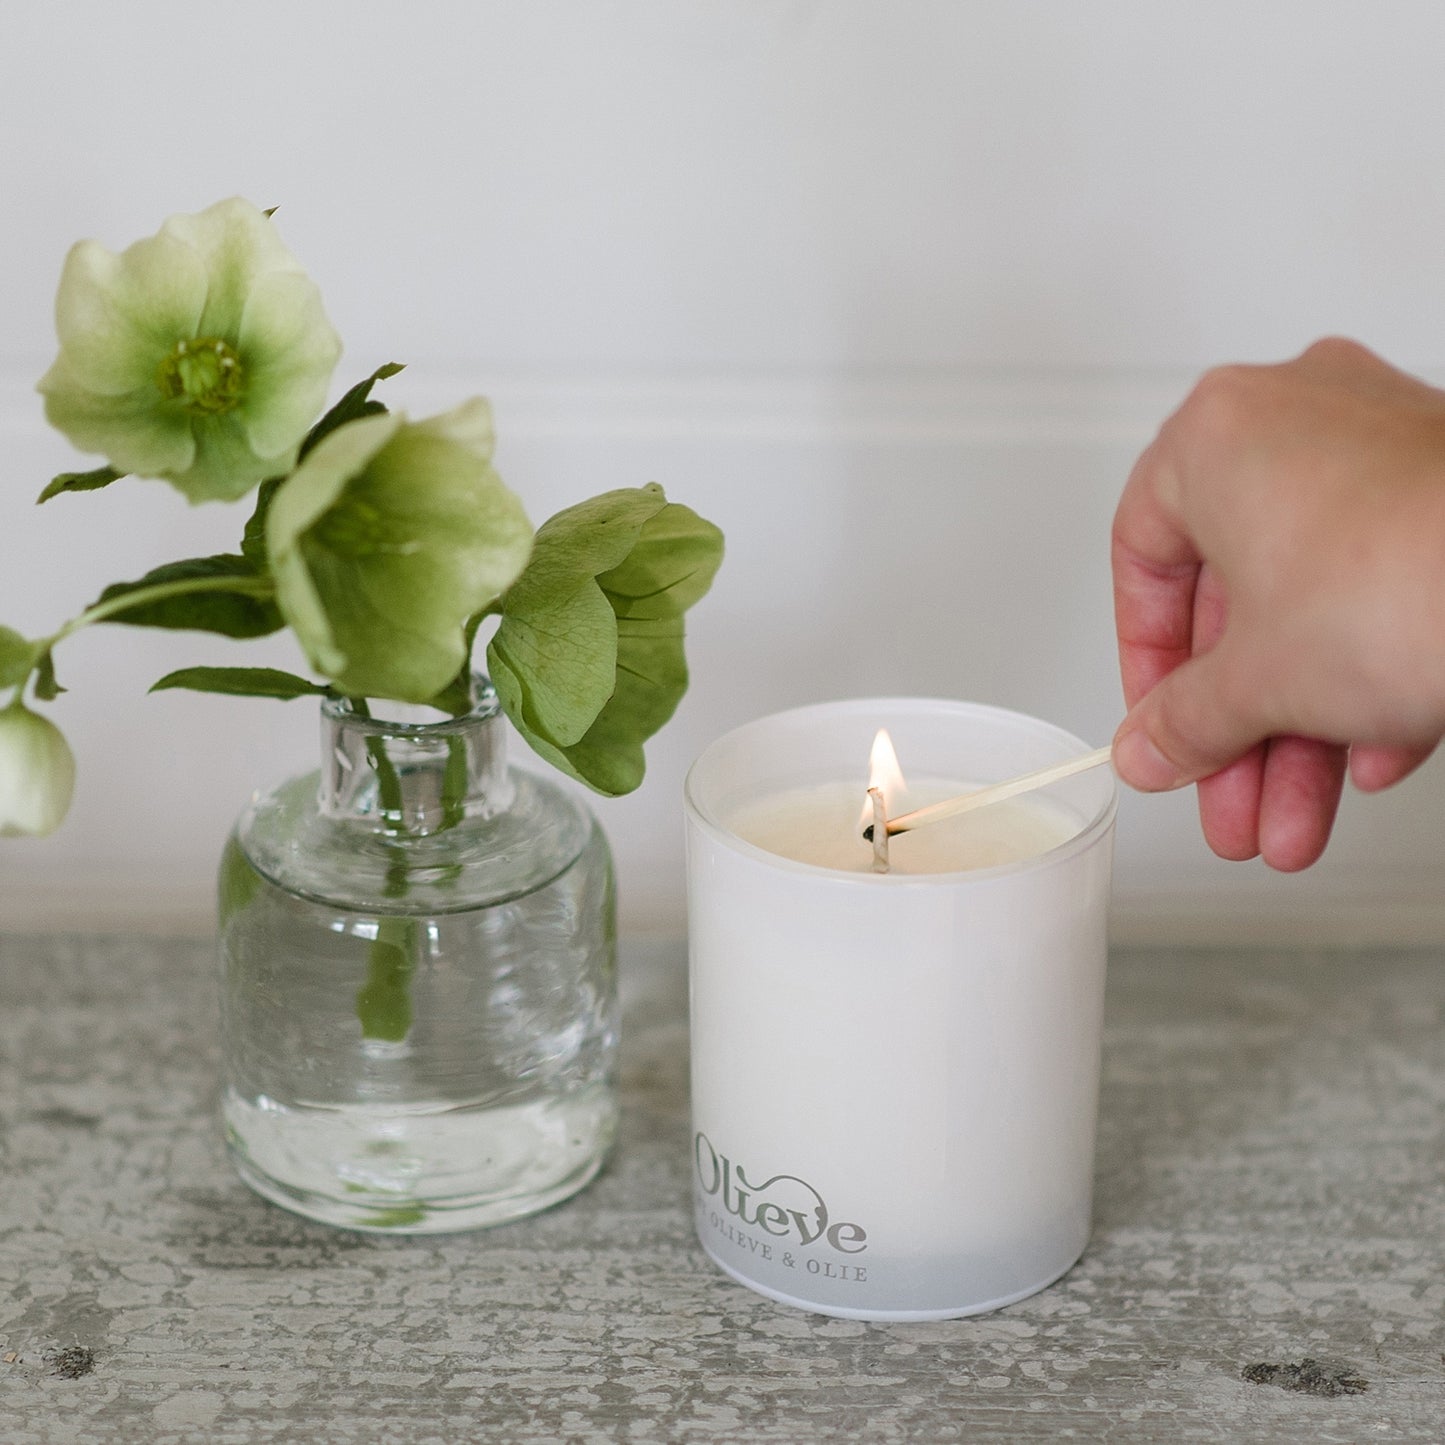 Olieve and Olie Candles